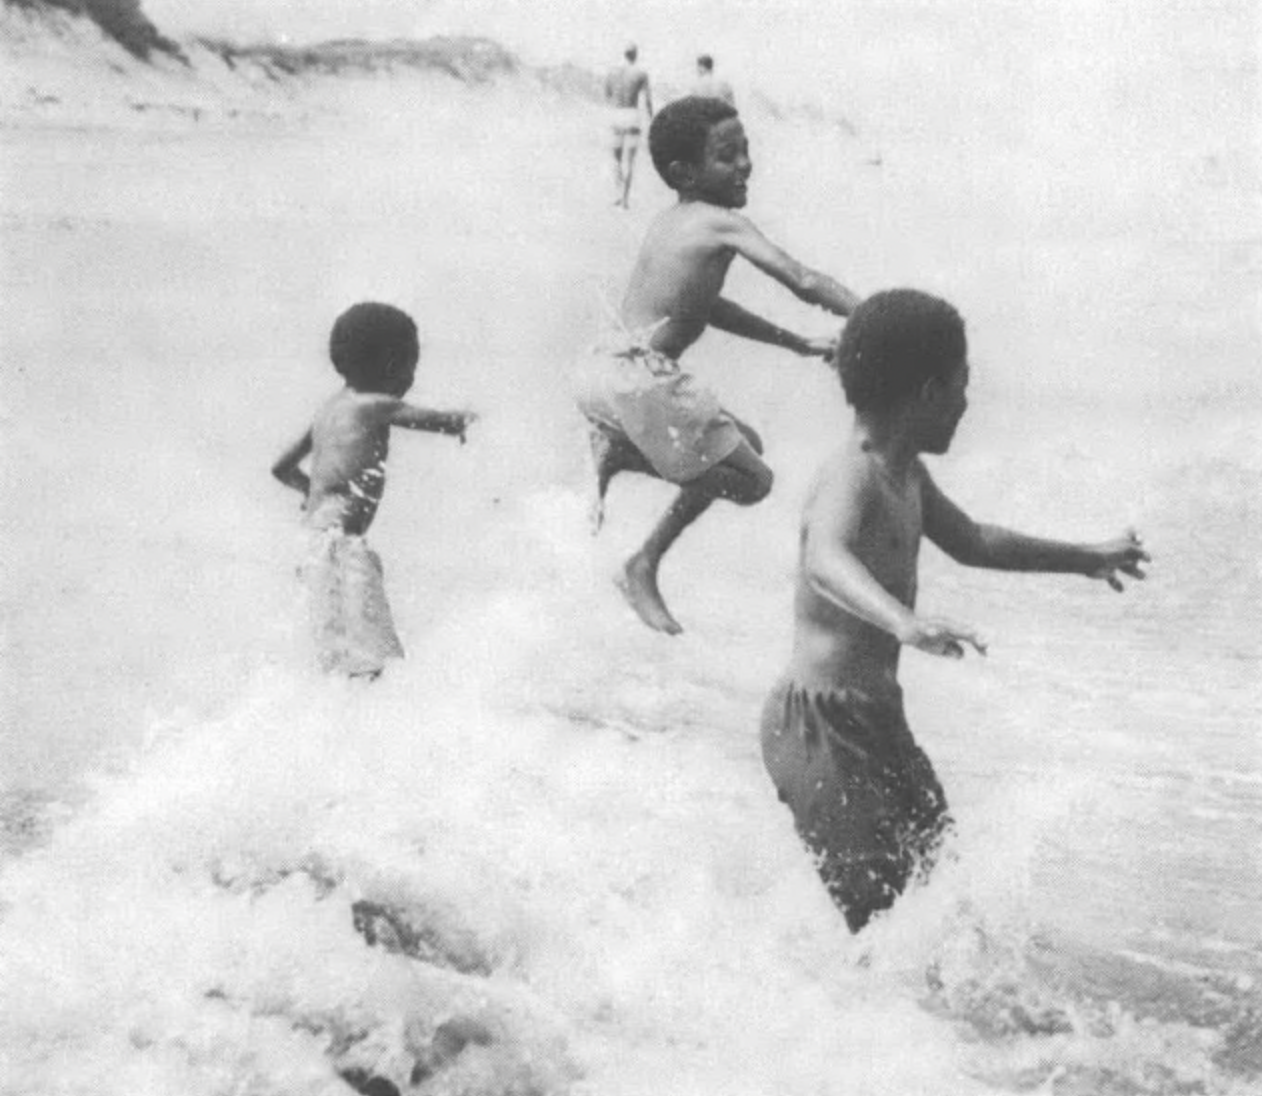 Three young Black boys playing in water